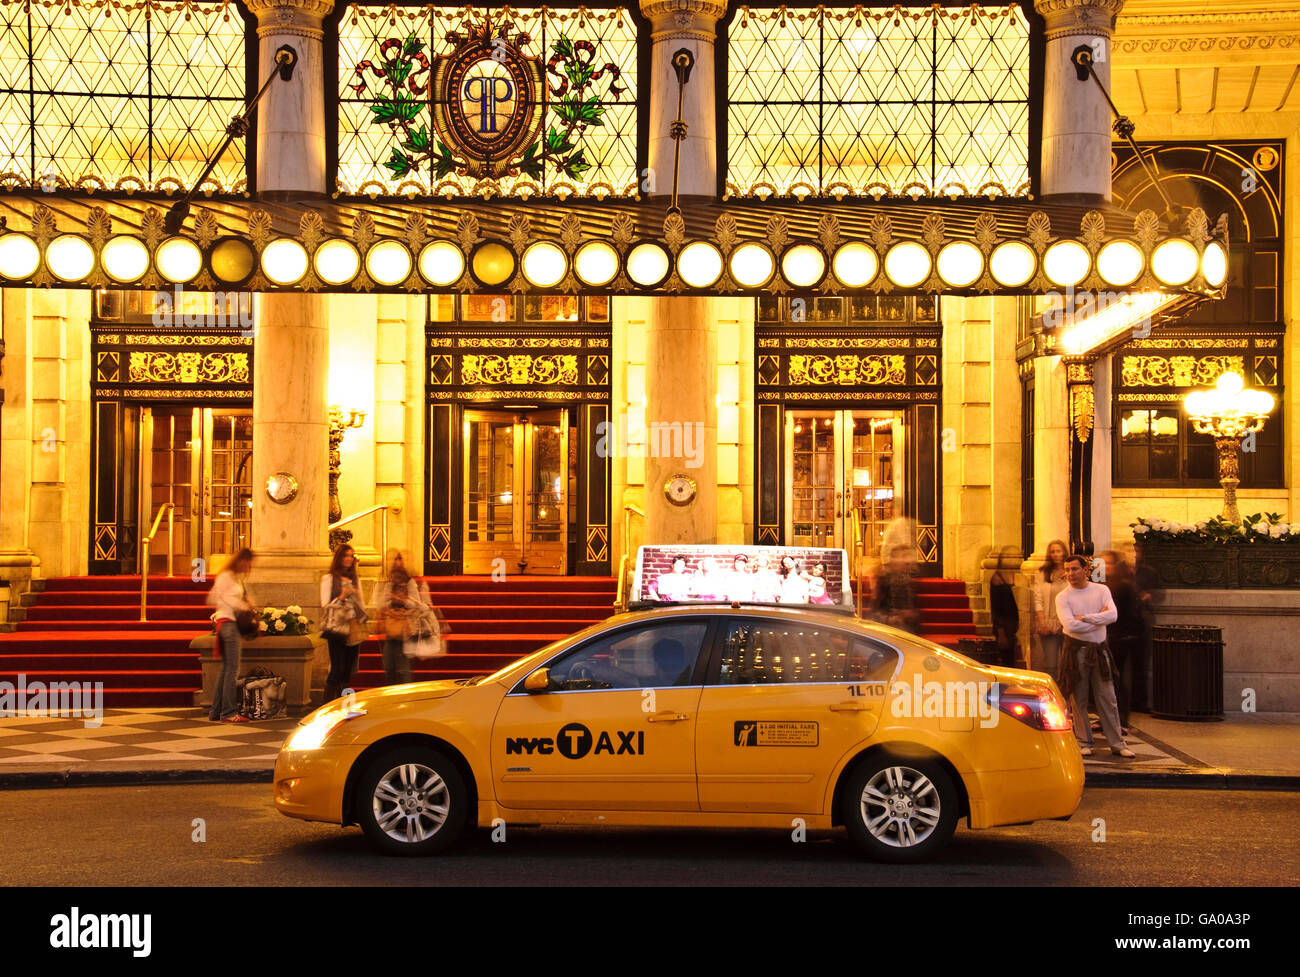 Yellow cab parked in front of the Plaza Hotel, 5th Avenue, New York City, New York, USA Stock Photo